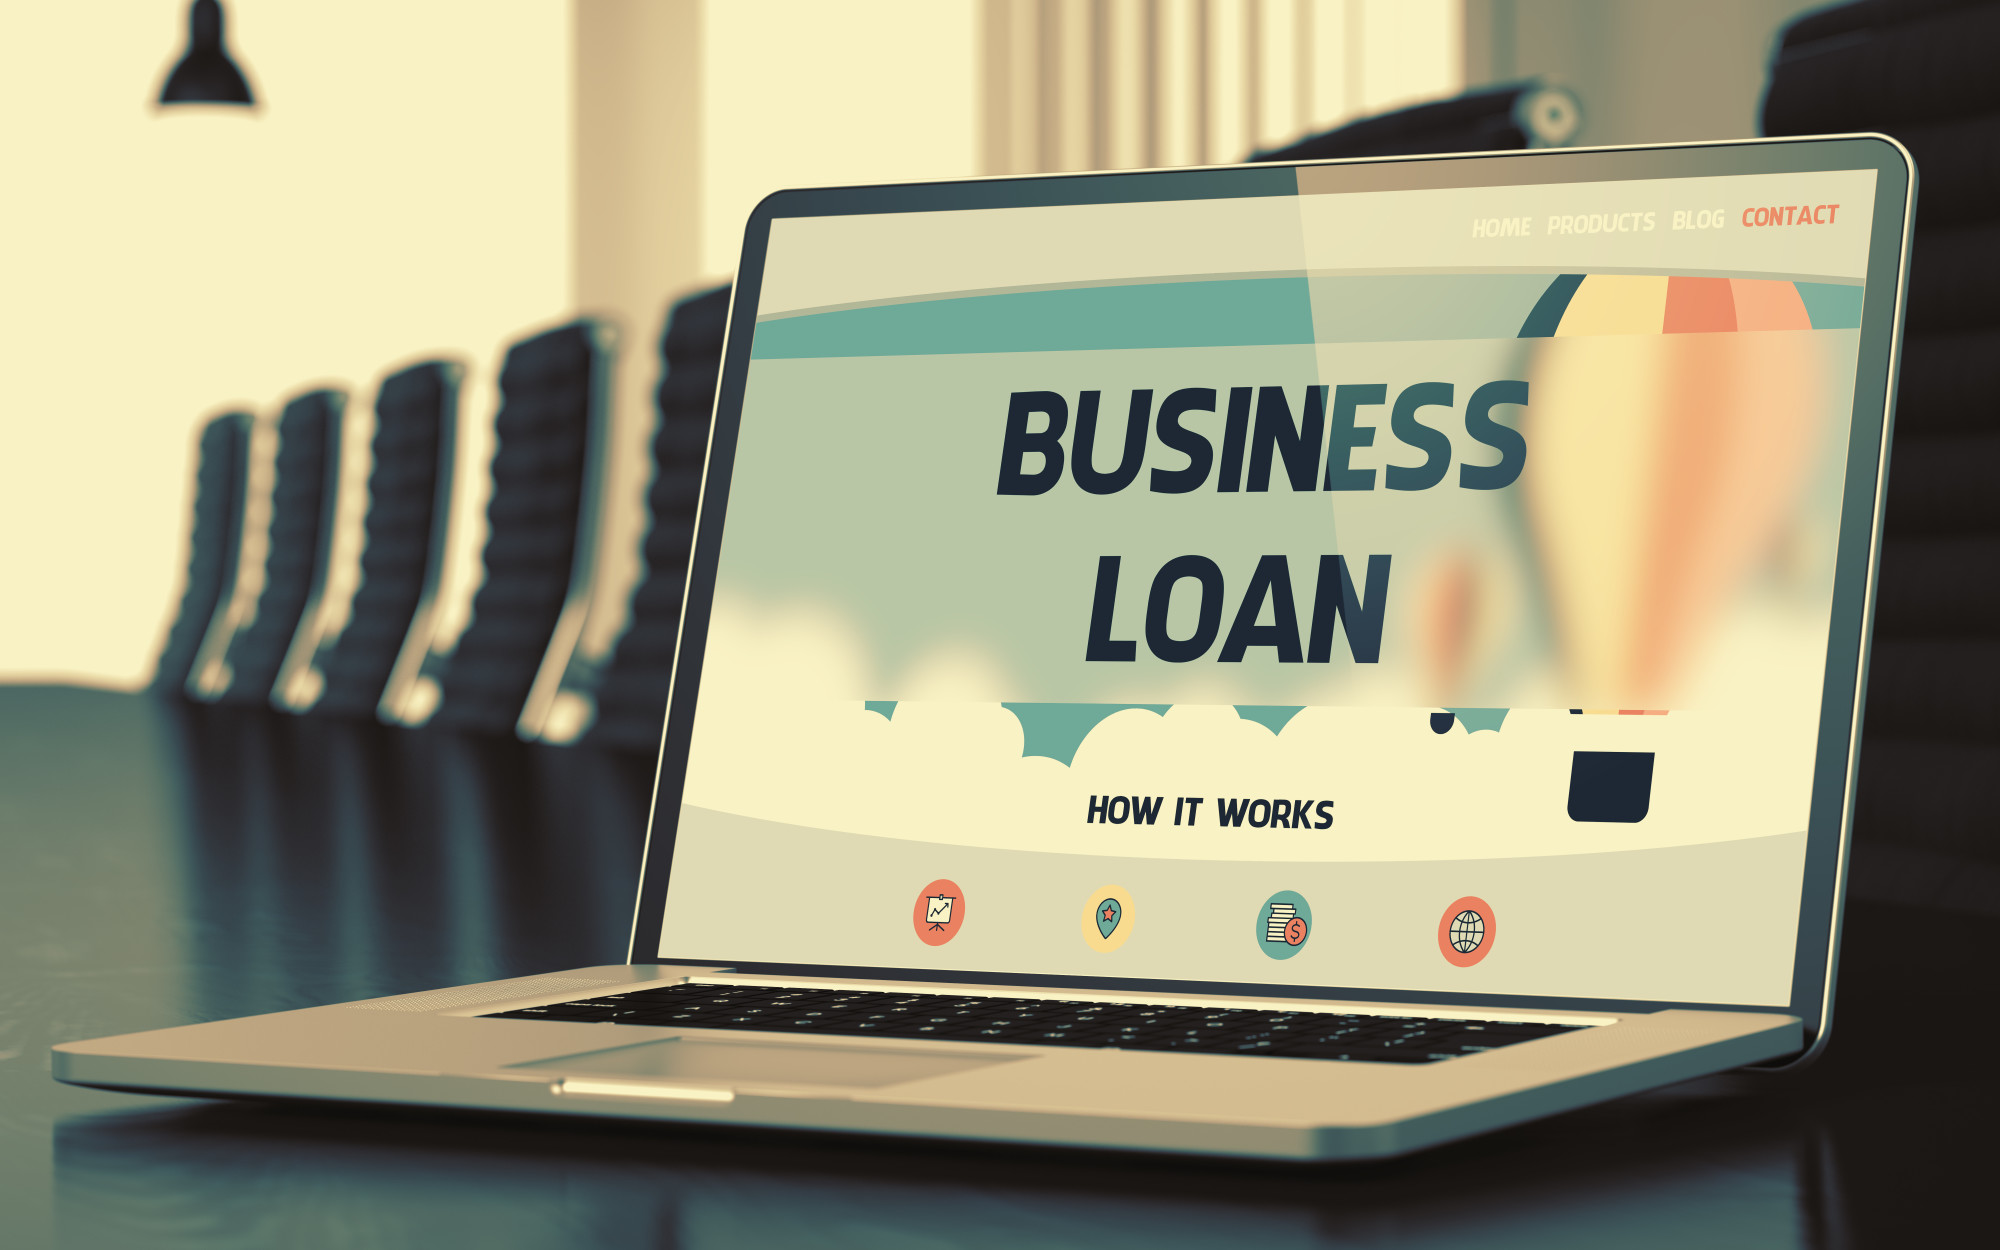 What are the easiest types of business loans to get in the United States